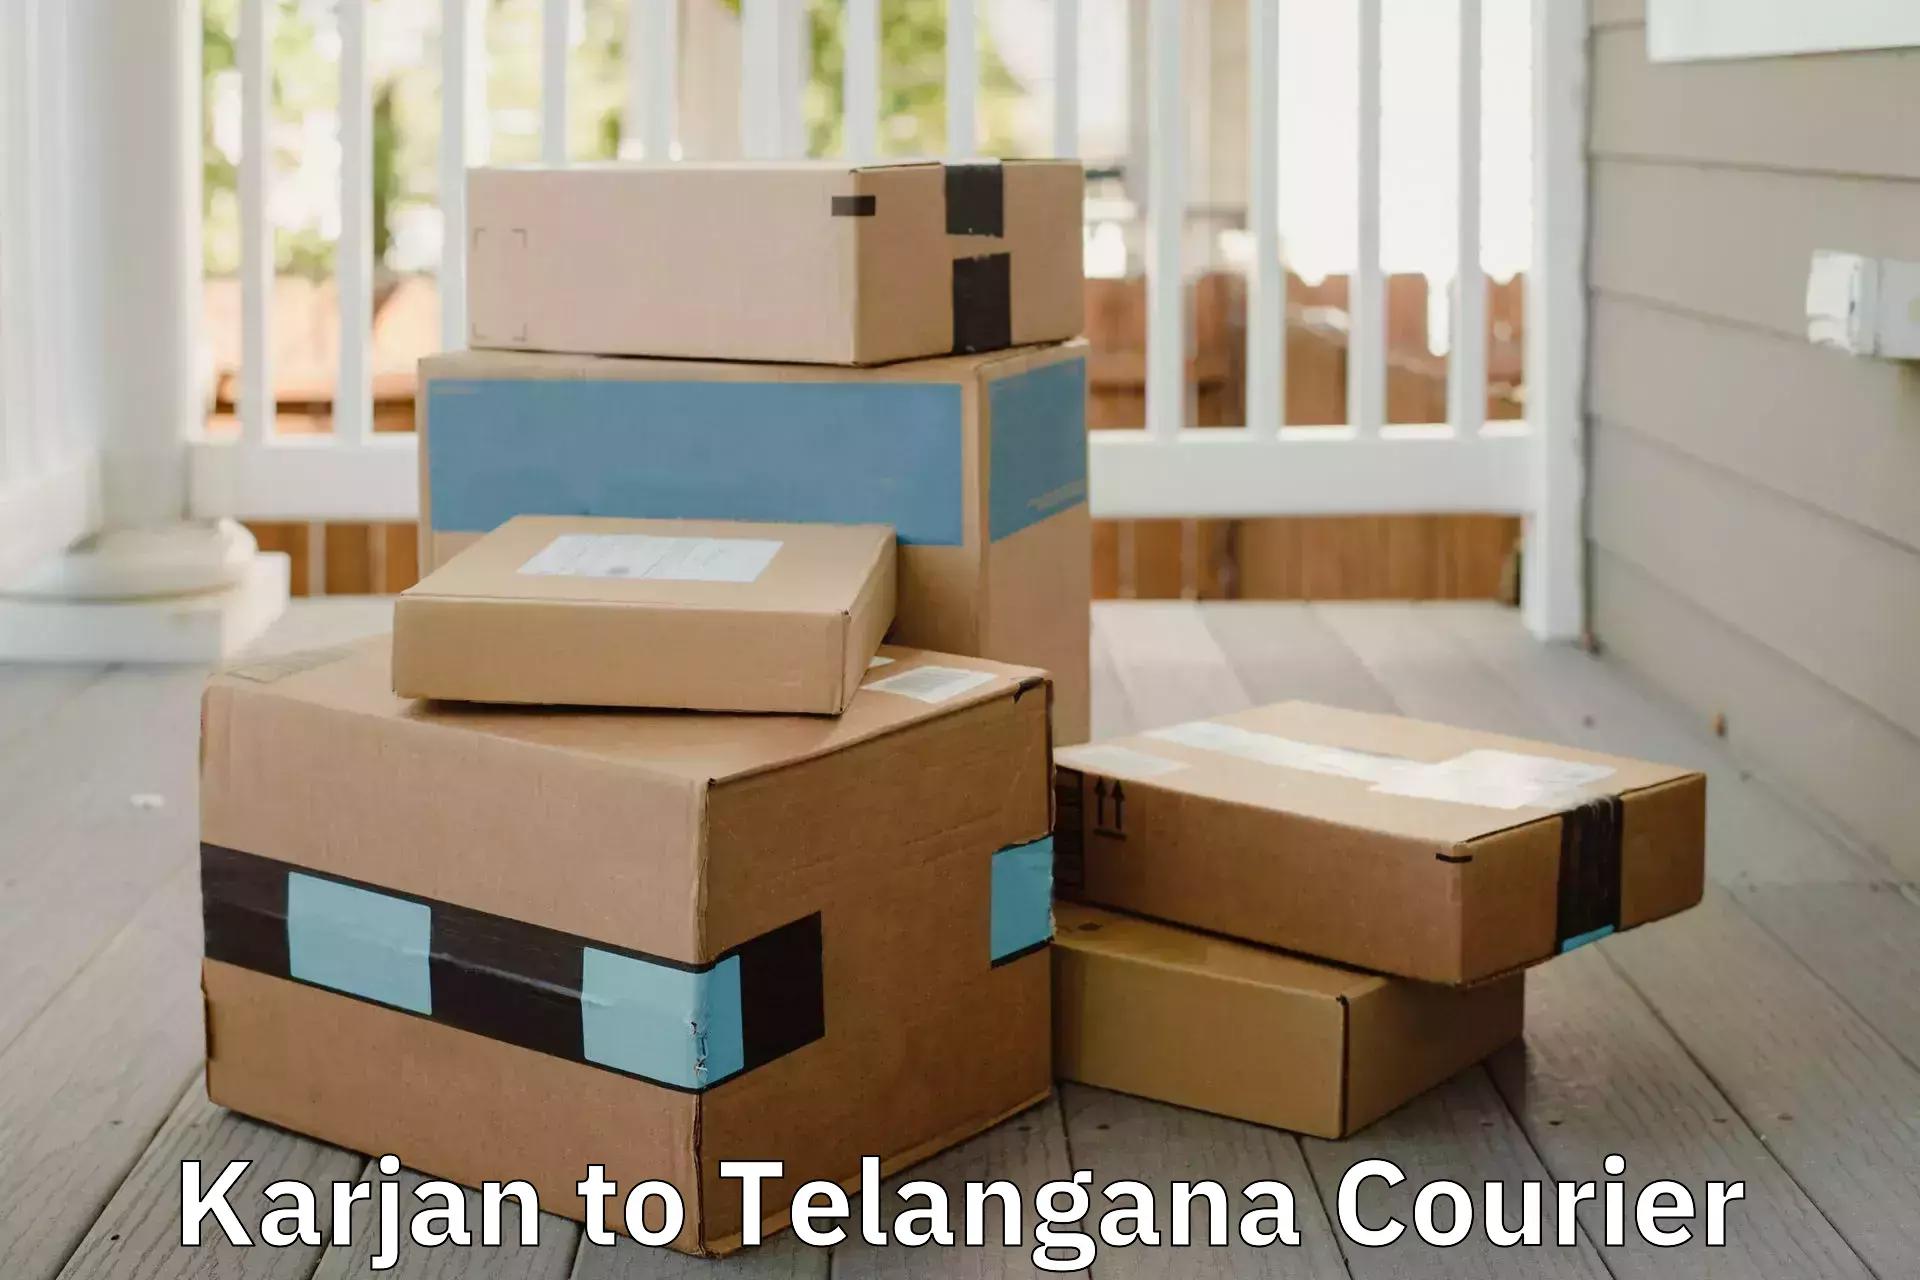 Professional movers and packers in Karjan to Amangal